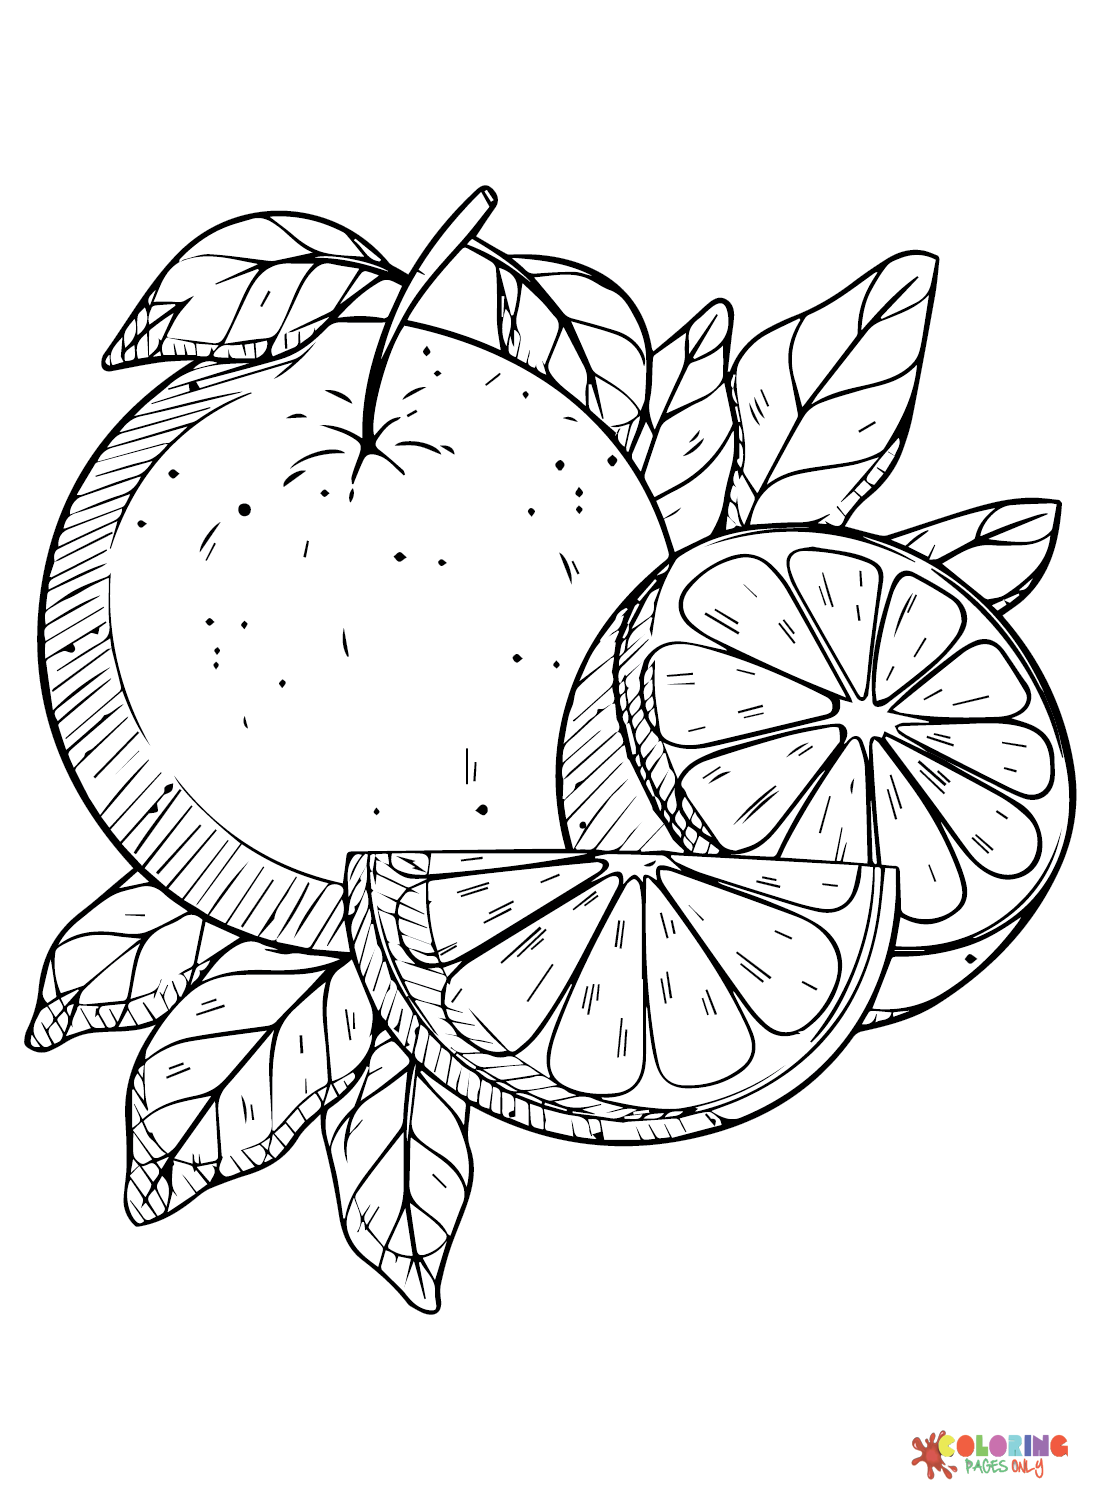 Citrus-fruits for Kids Coloring Page